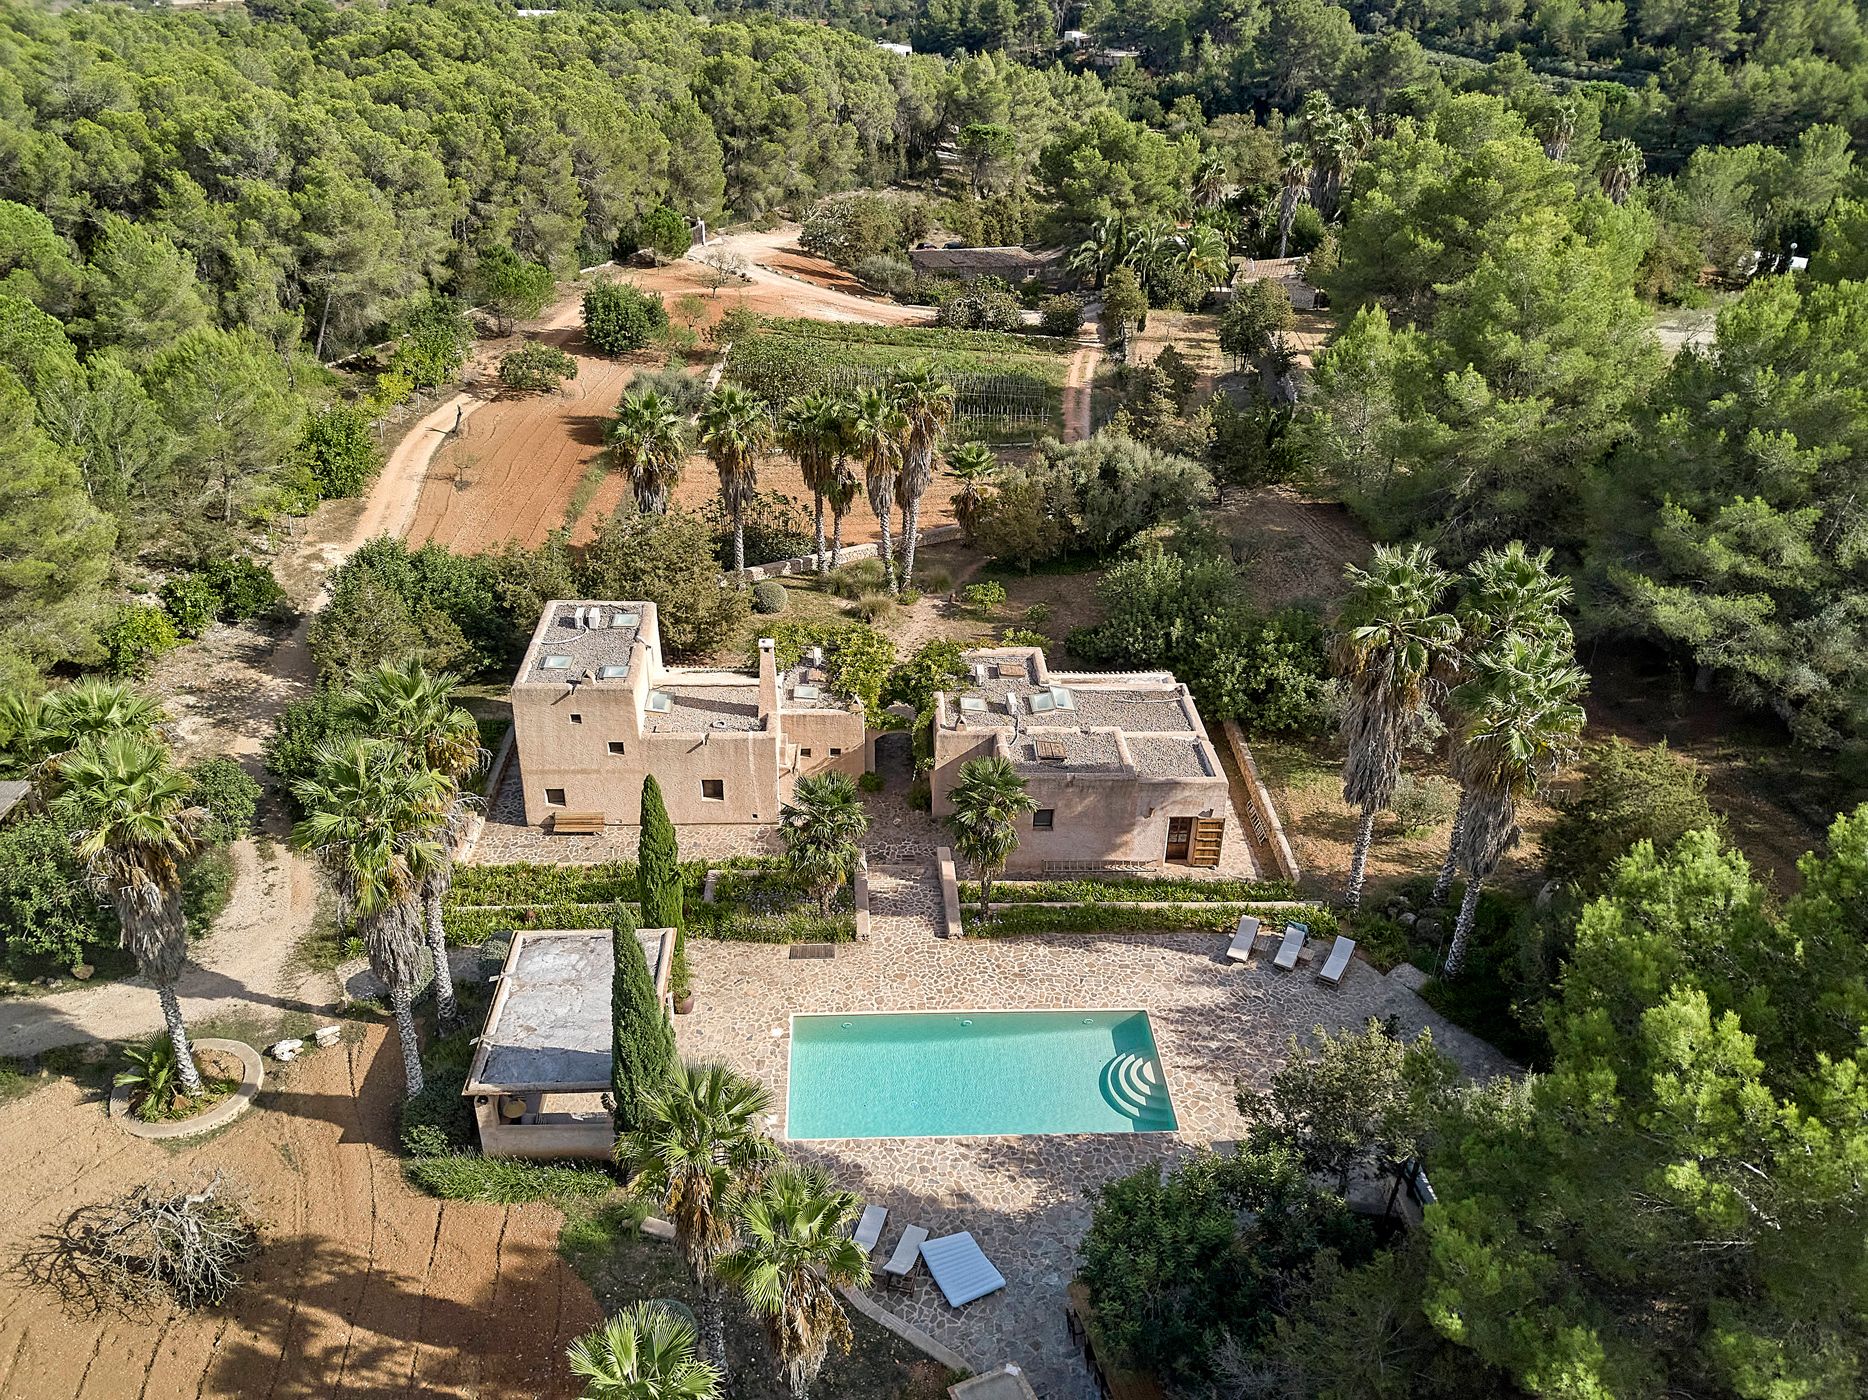 Pool and casitas of a villa for sale in northern Ibiza